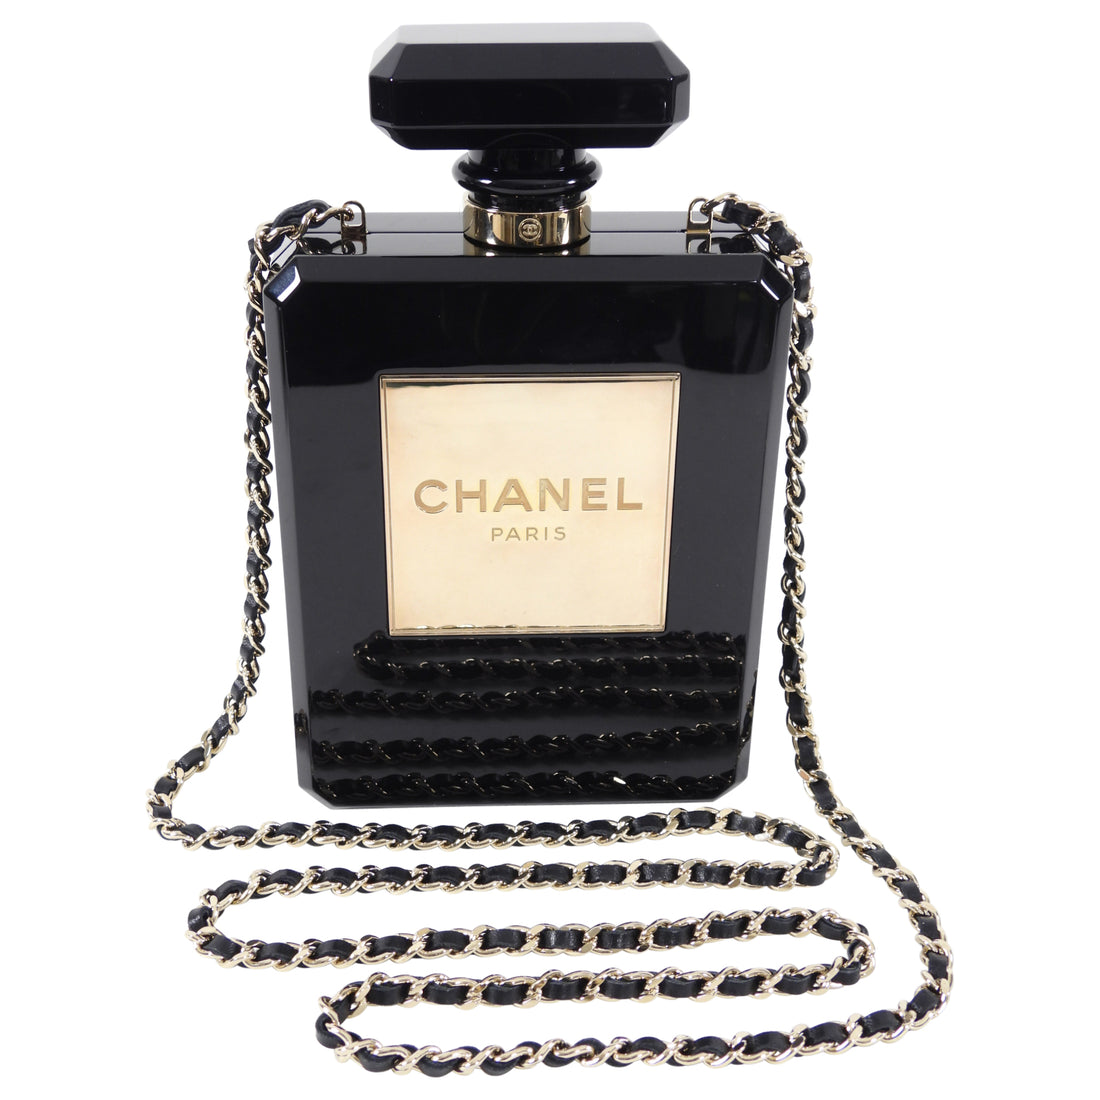 Chanel Limited Edition Acrylic Perfume Evening Bag I MISS YOU VINTAGE